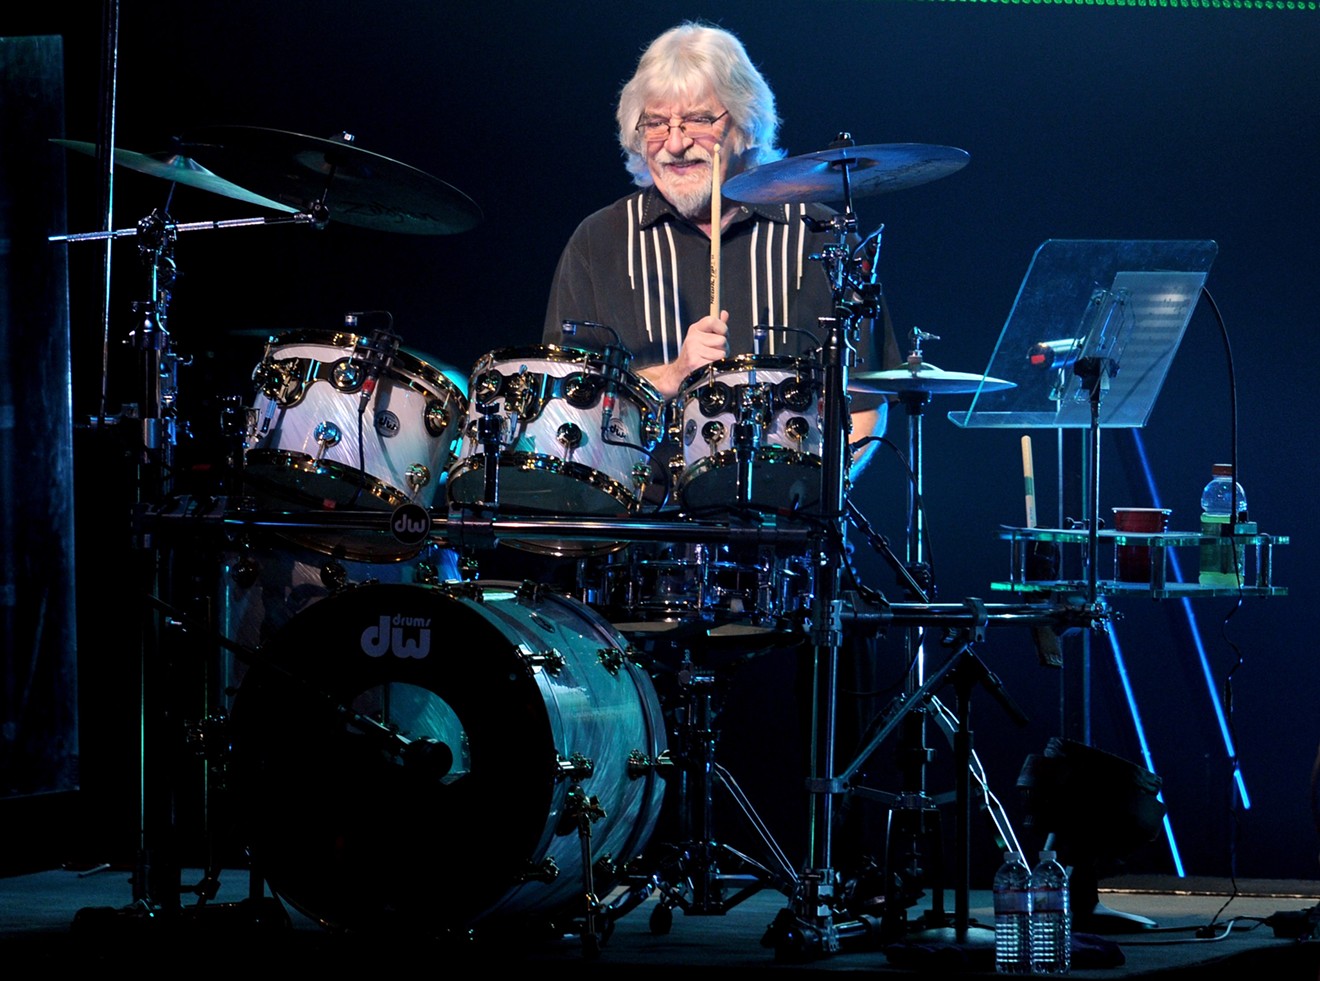 The Moody Blues' drummer Graeme Edge died on Nov. 11. His poetic contributions to rock music are eternal.